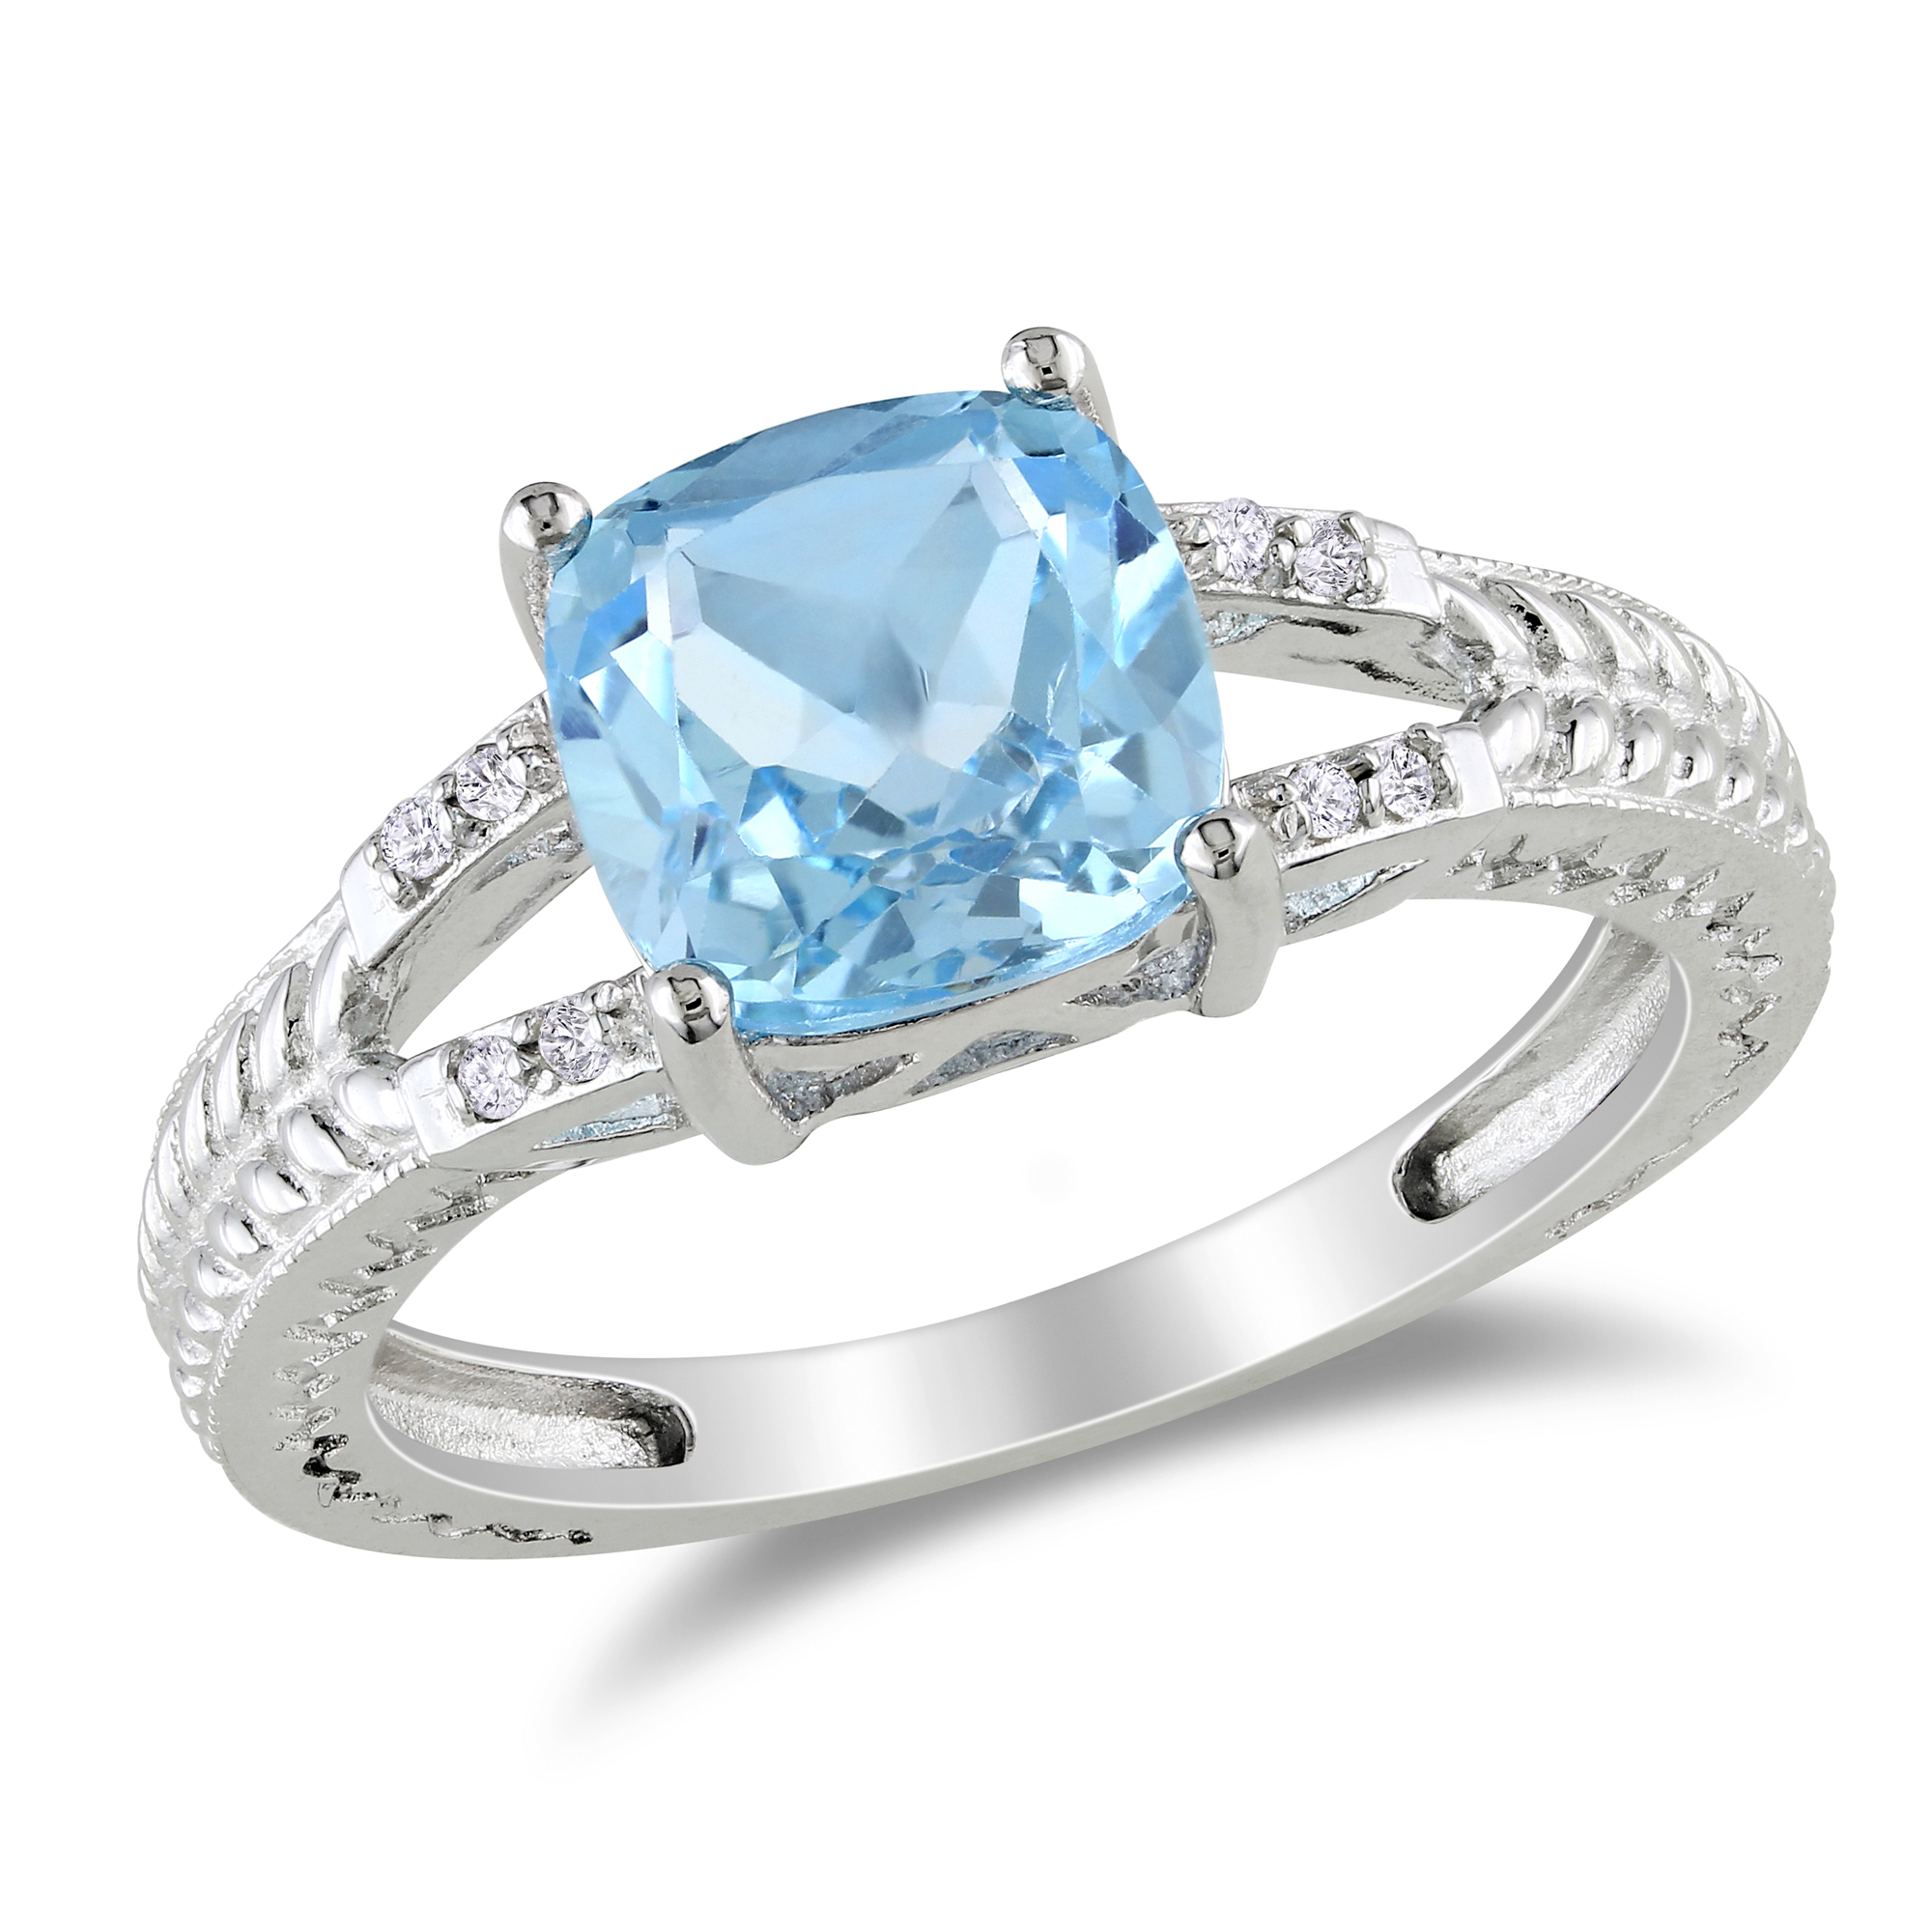 Amour 0.04 Carat T.W. Diamond and 2 1/2 Carat T.G.W. Blue Topaz Fashion Ring in Sterling Silver I3